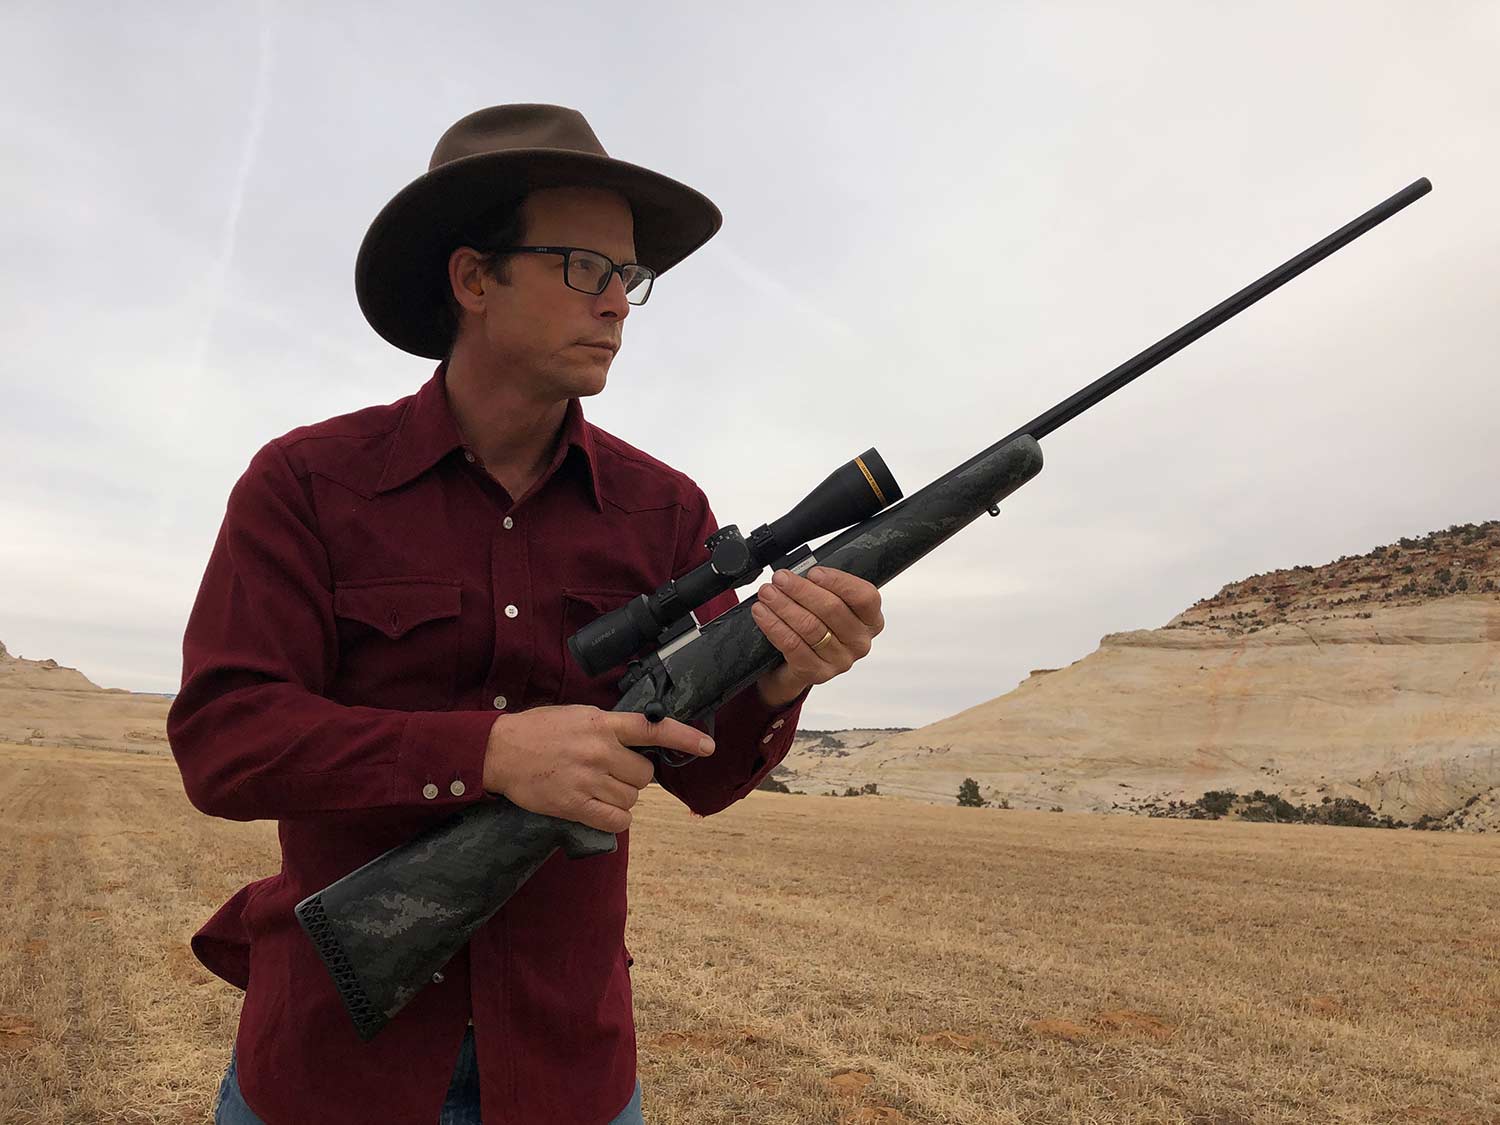 Man in cowboy hat holding a Weatherby Backcountry rifle.